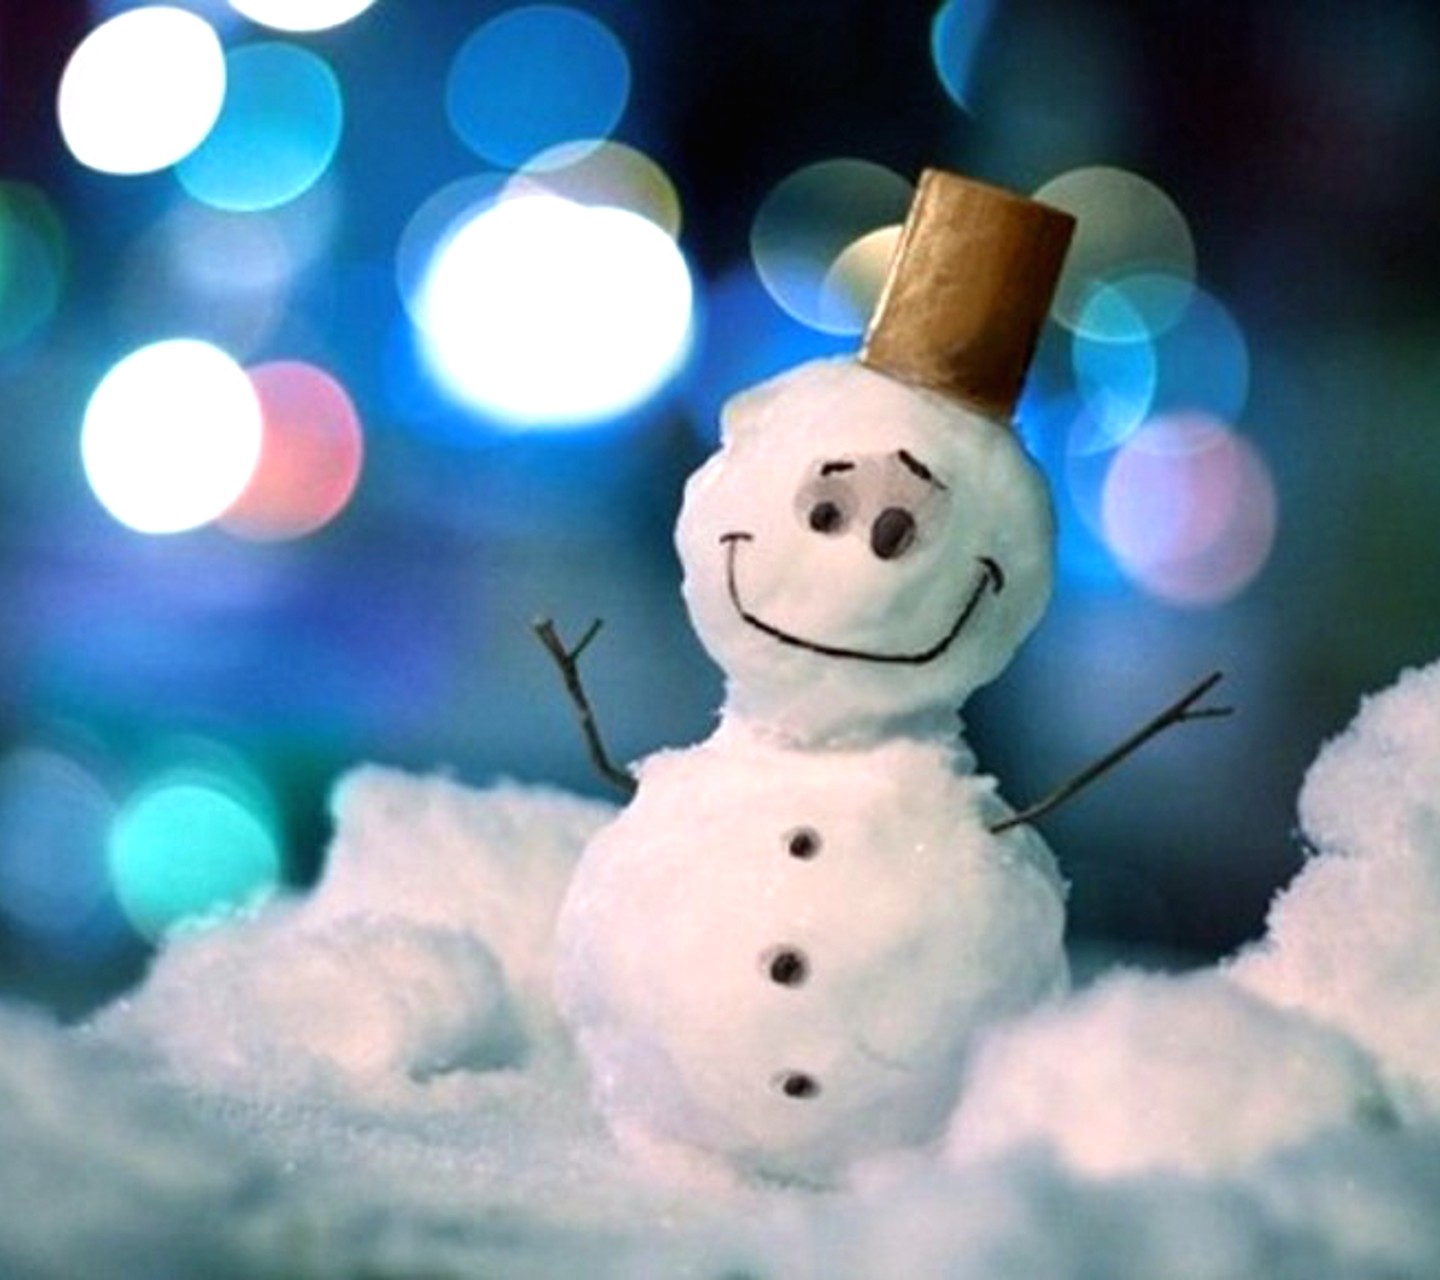 Download Cute snowman   Daily new wallpapers Mobile Version